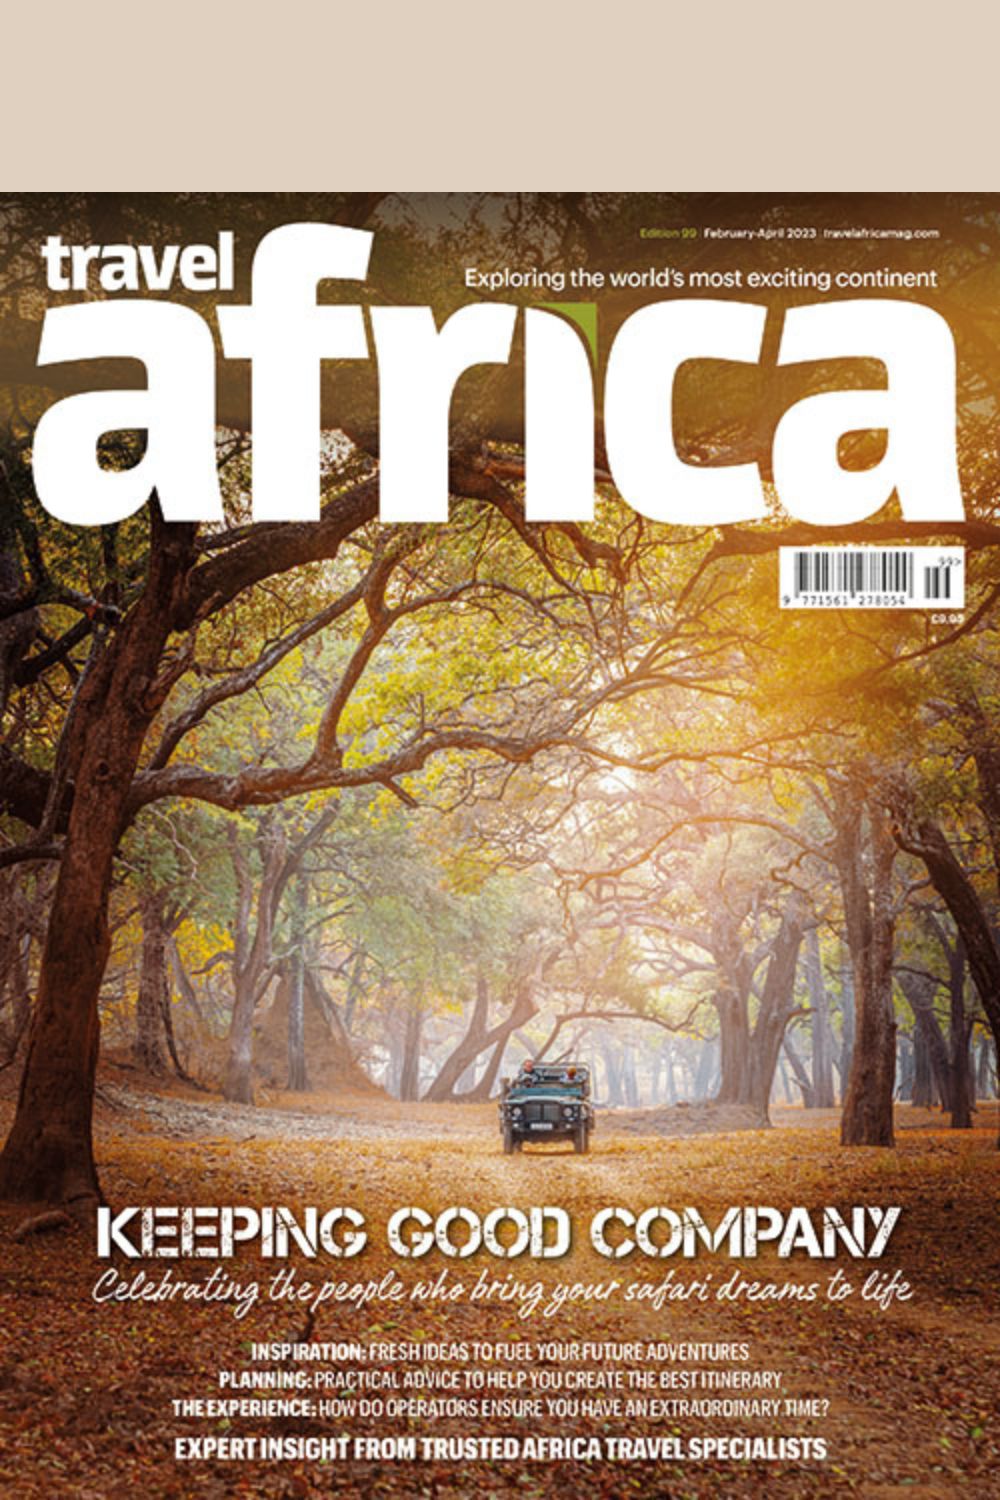 Travel Africa Magazine Issue 99 cover